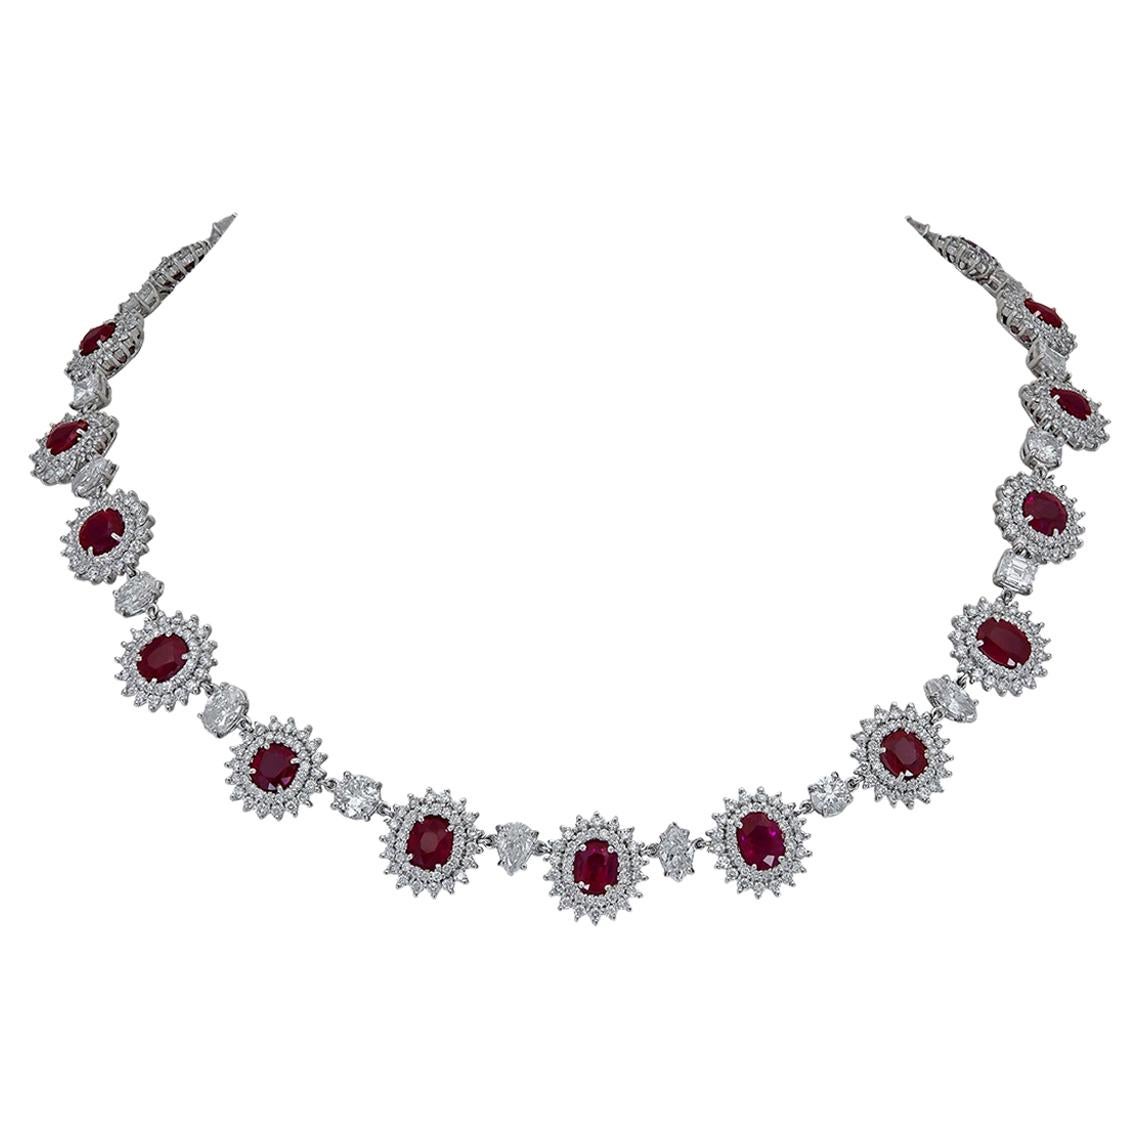 21.58 Carat Ruby and 30.98 Carat Diamond Halo Flower Necklace